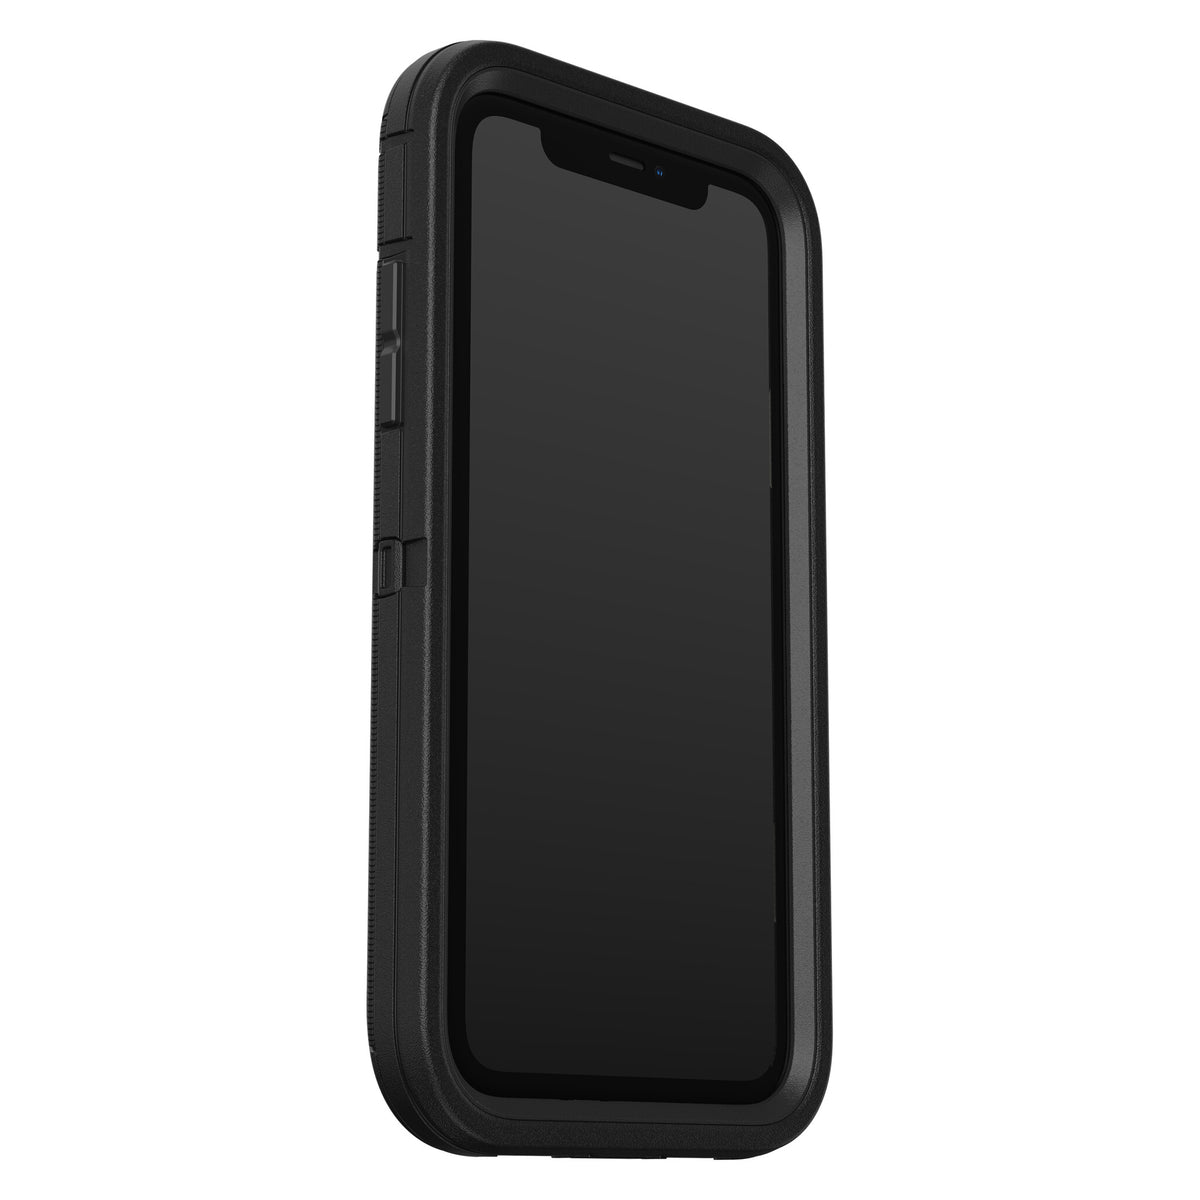 OtterBox Defender Series for iPhone 11 in Black